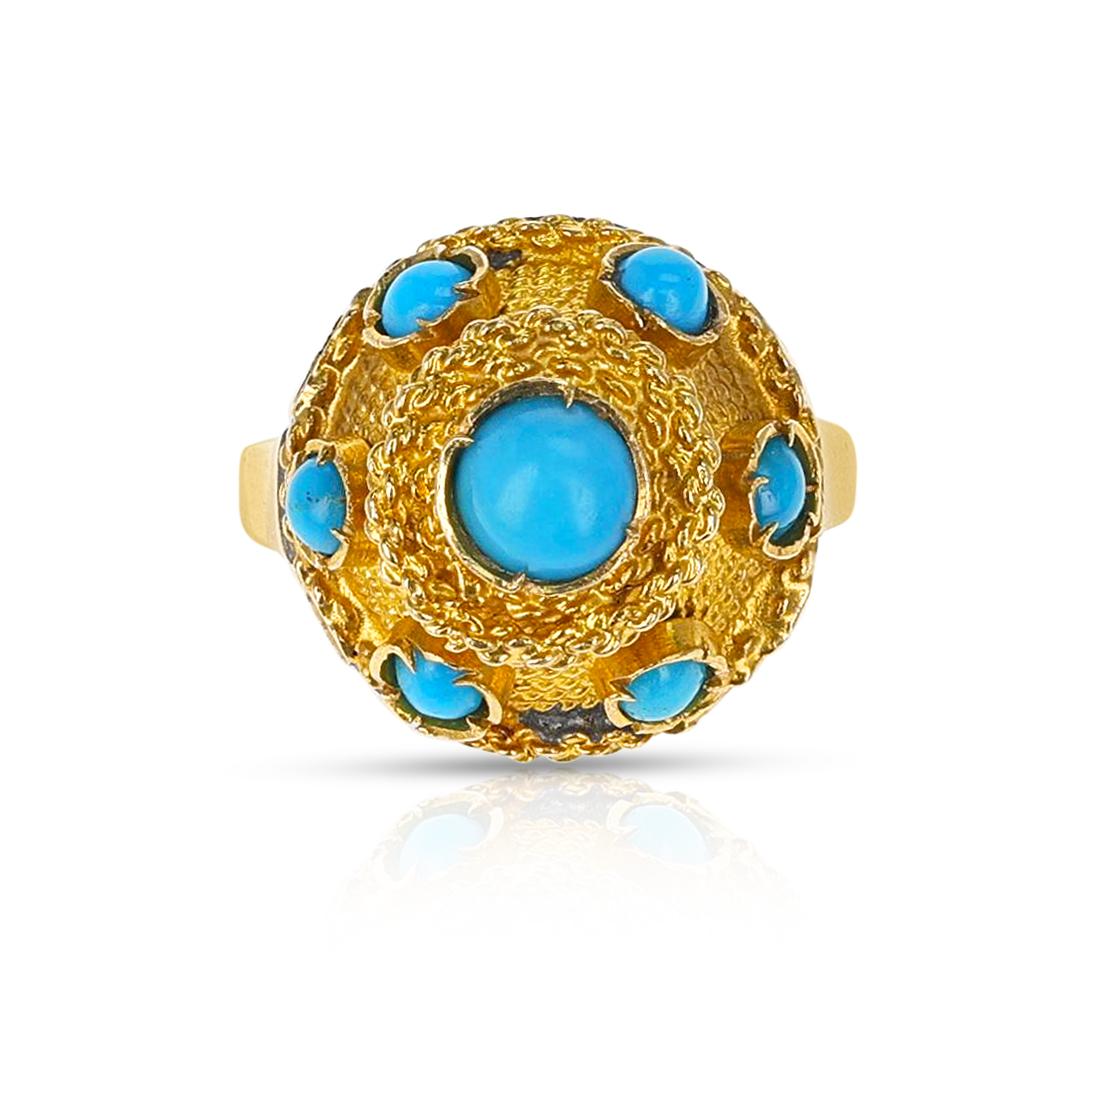 A Turquoise and Gold Ring. The Ring Size is US 2.50. The set consists of: Two pairs of earrings, a ring and a bracelet.
